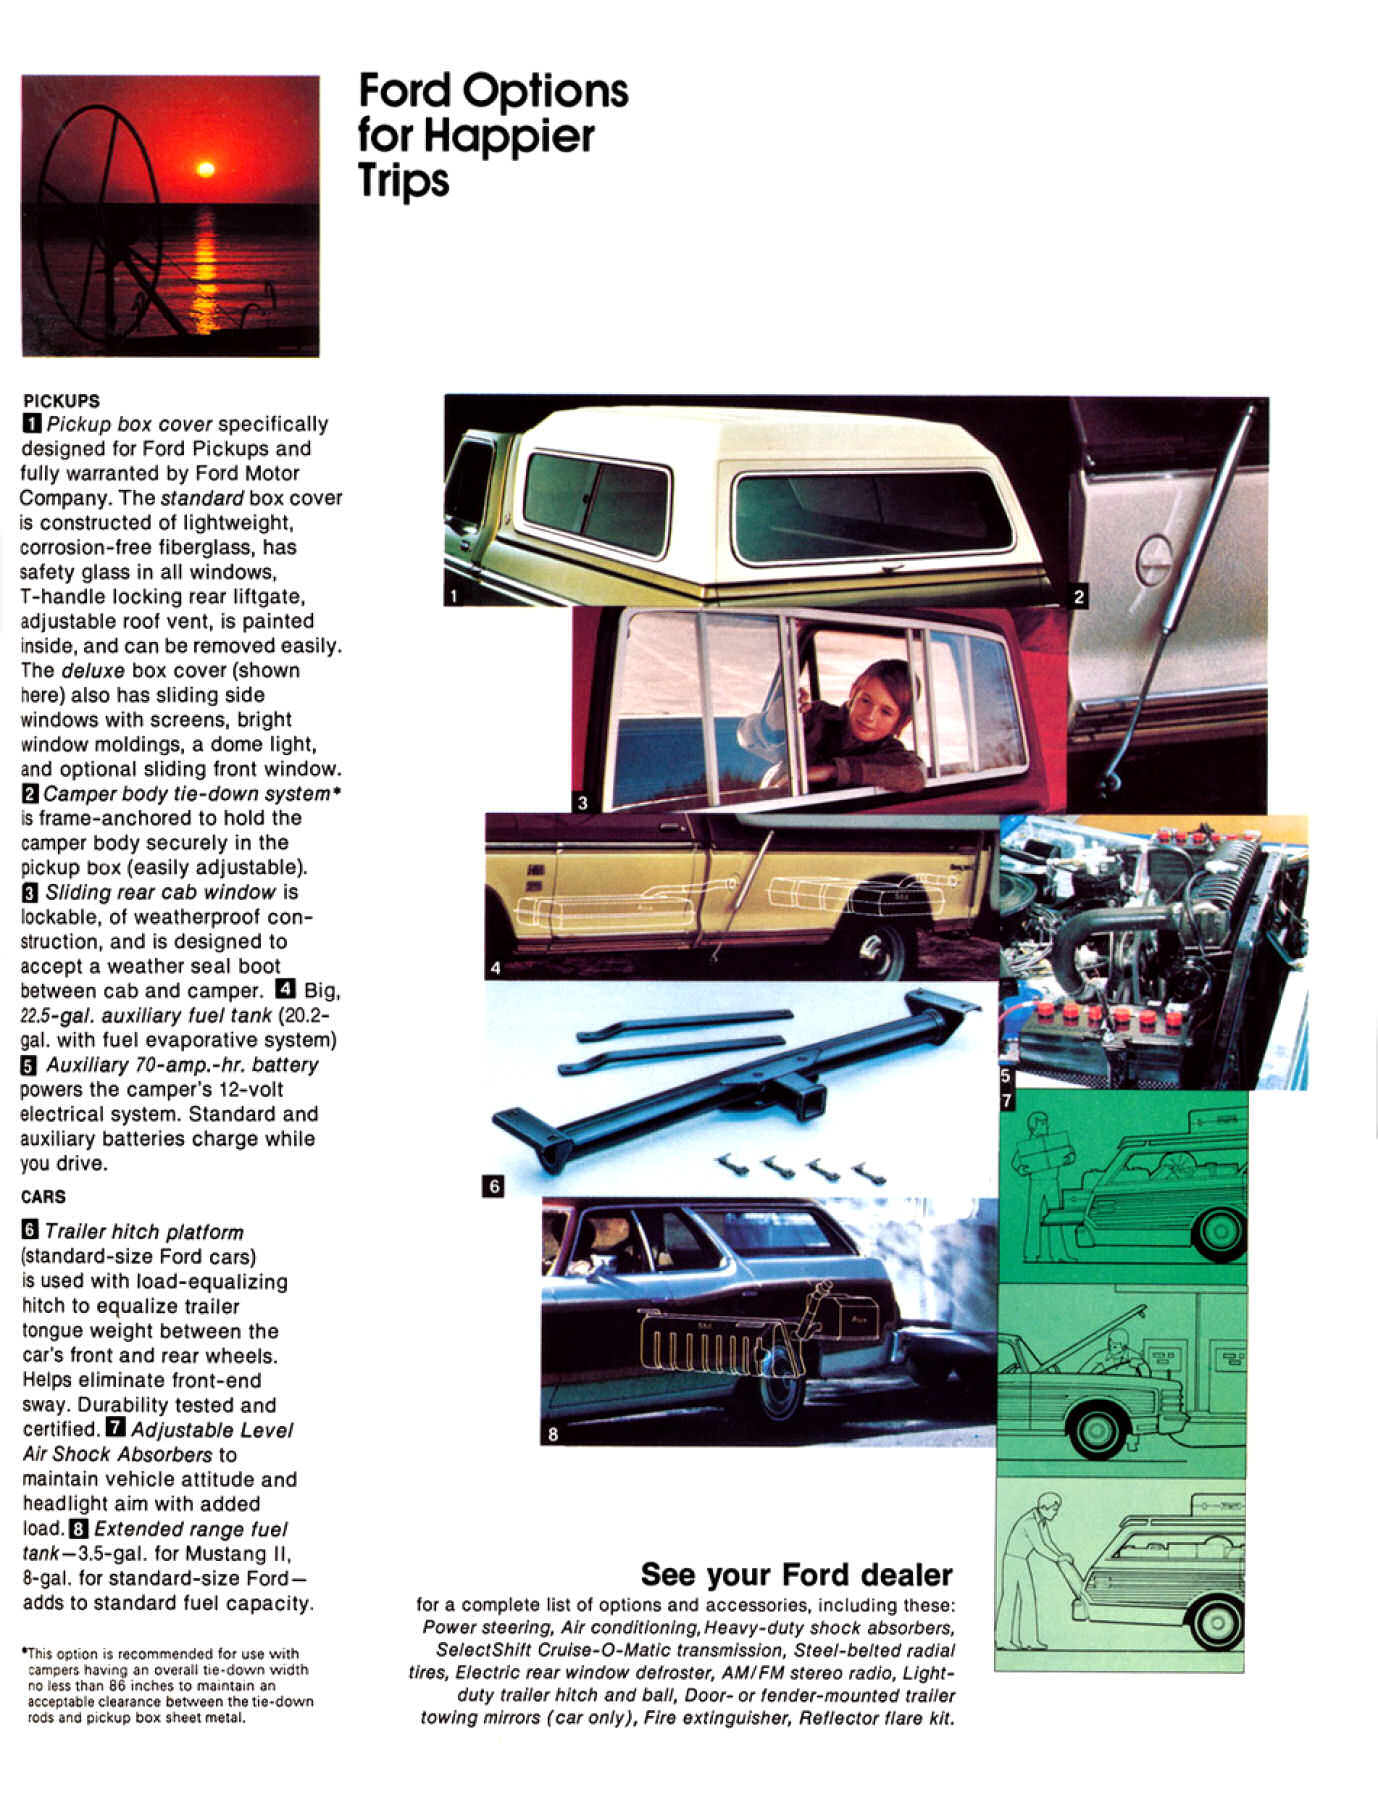 1976 Ford Recreation Vehicles-35